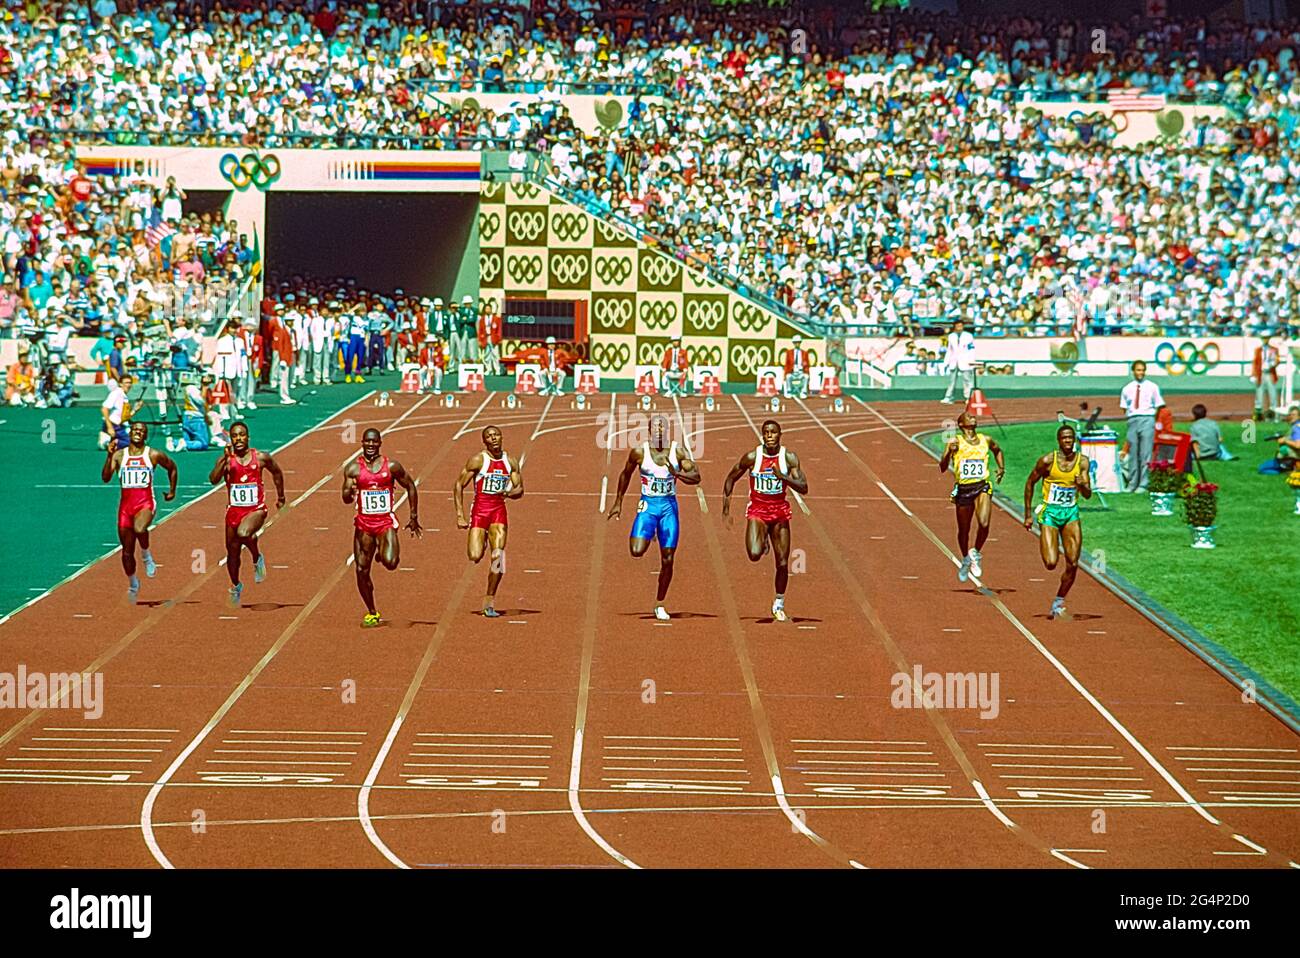 Final of the Men's 100m at the 1988 Olympic Summer Games. Ben Johnson (CAN) #159 wins but is later disqualified giving the victory to Carl Lewis (USA) #1102. Stock Photo